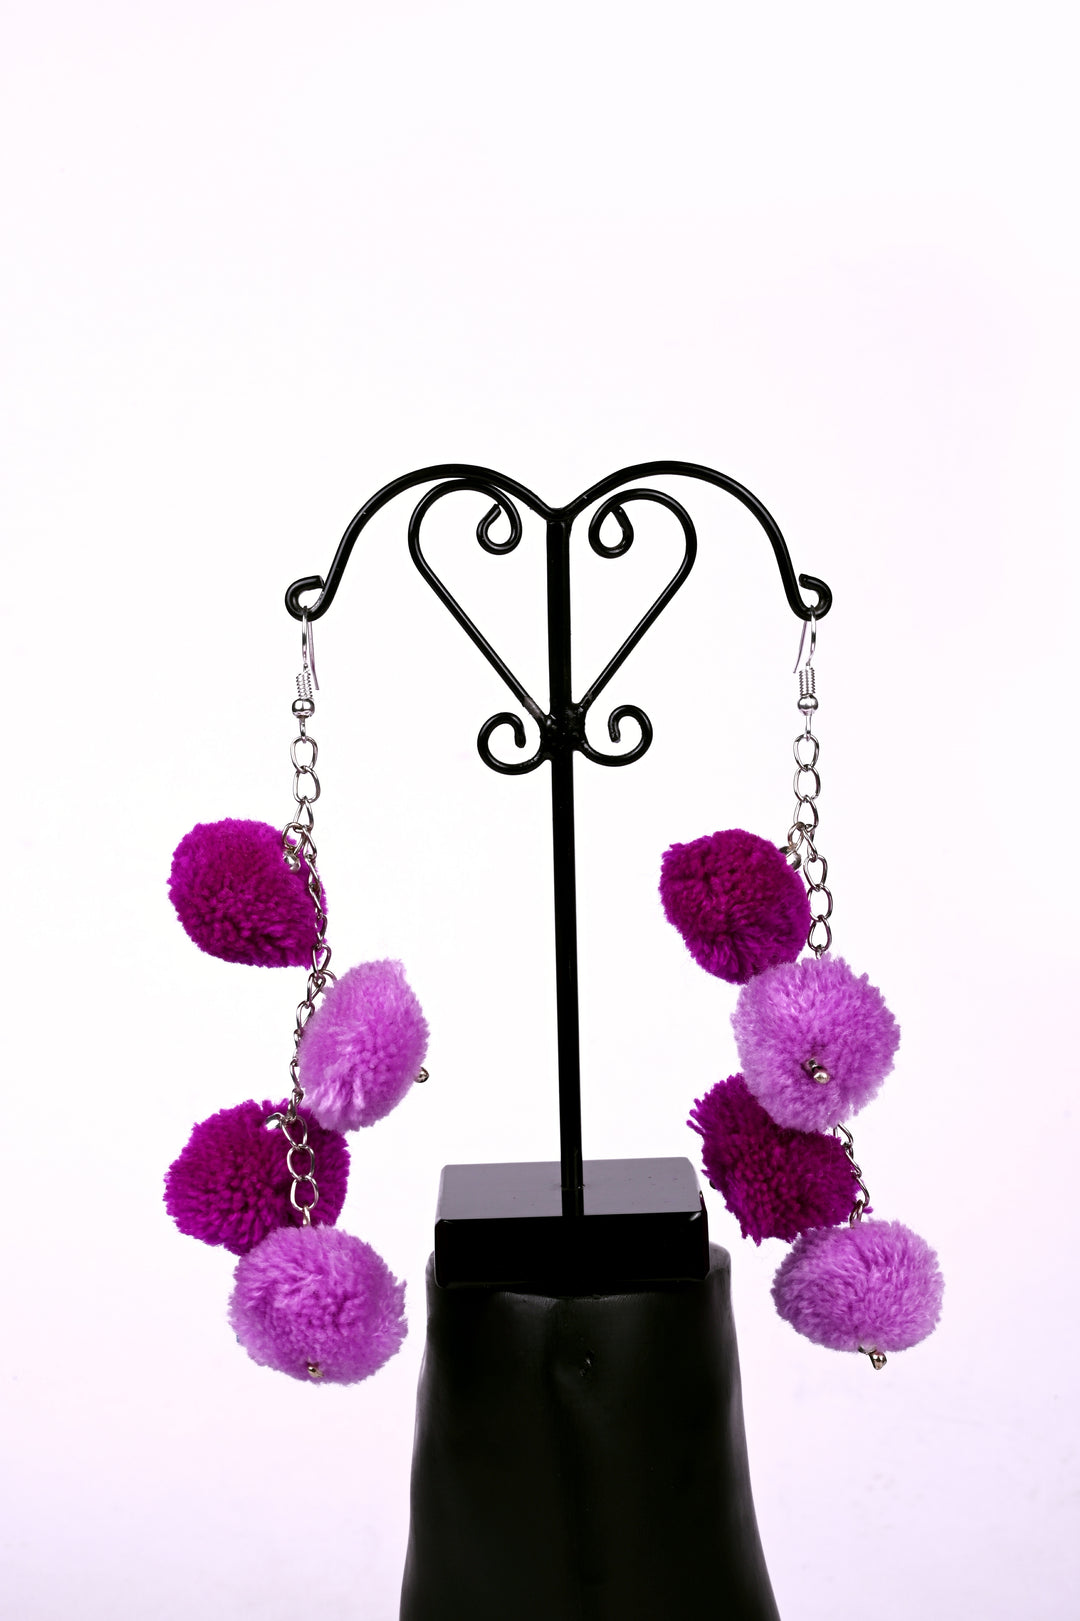 Metal Chain Earring Styled With Dual Tone Purple Colored Pom Balls